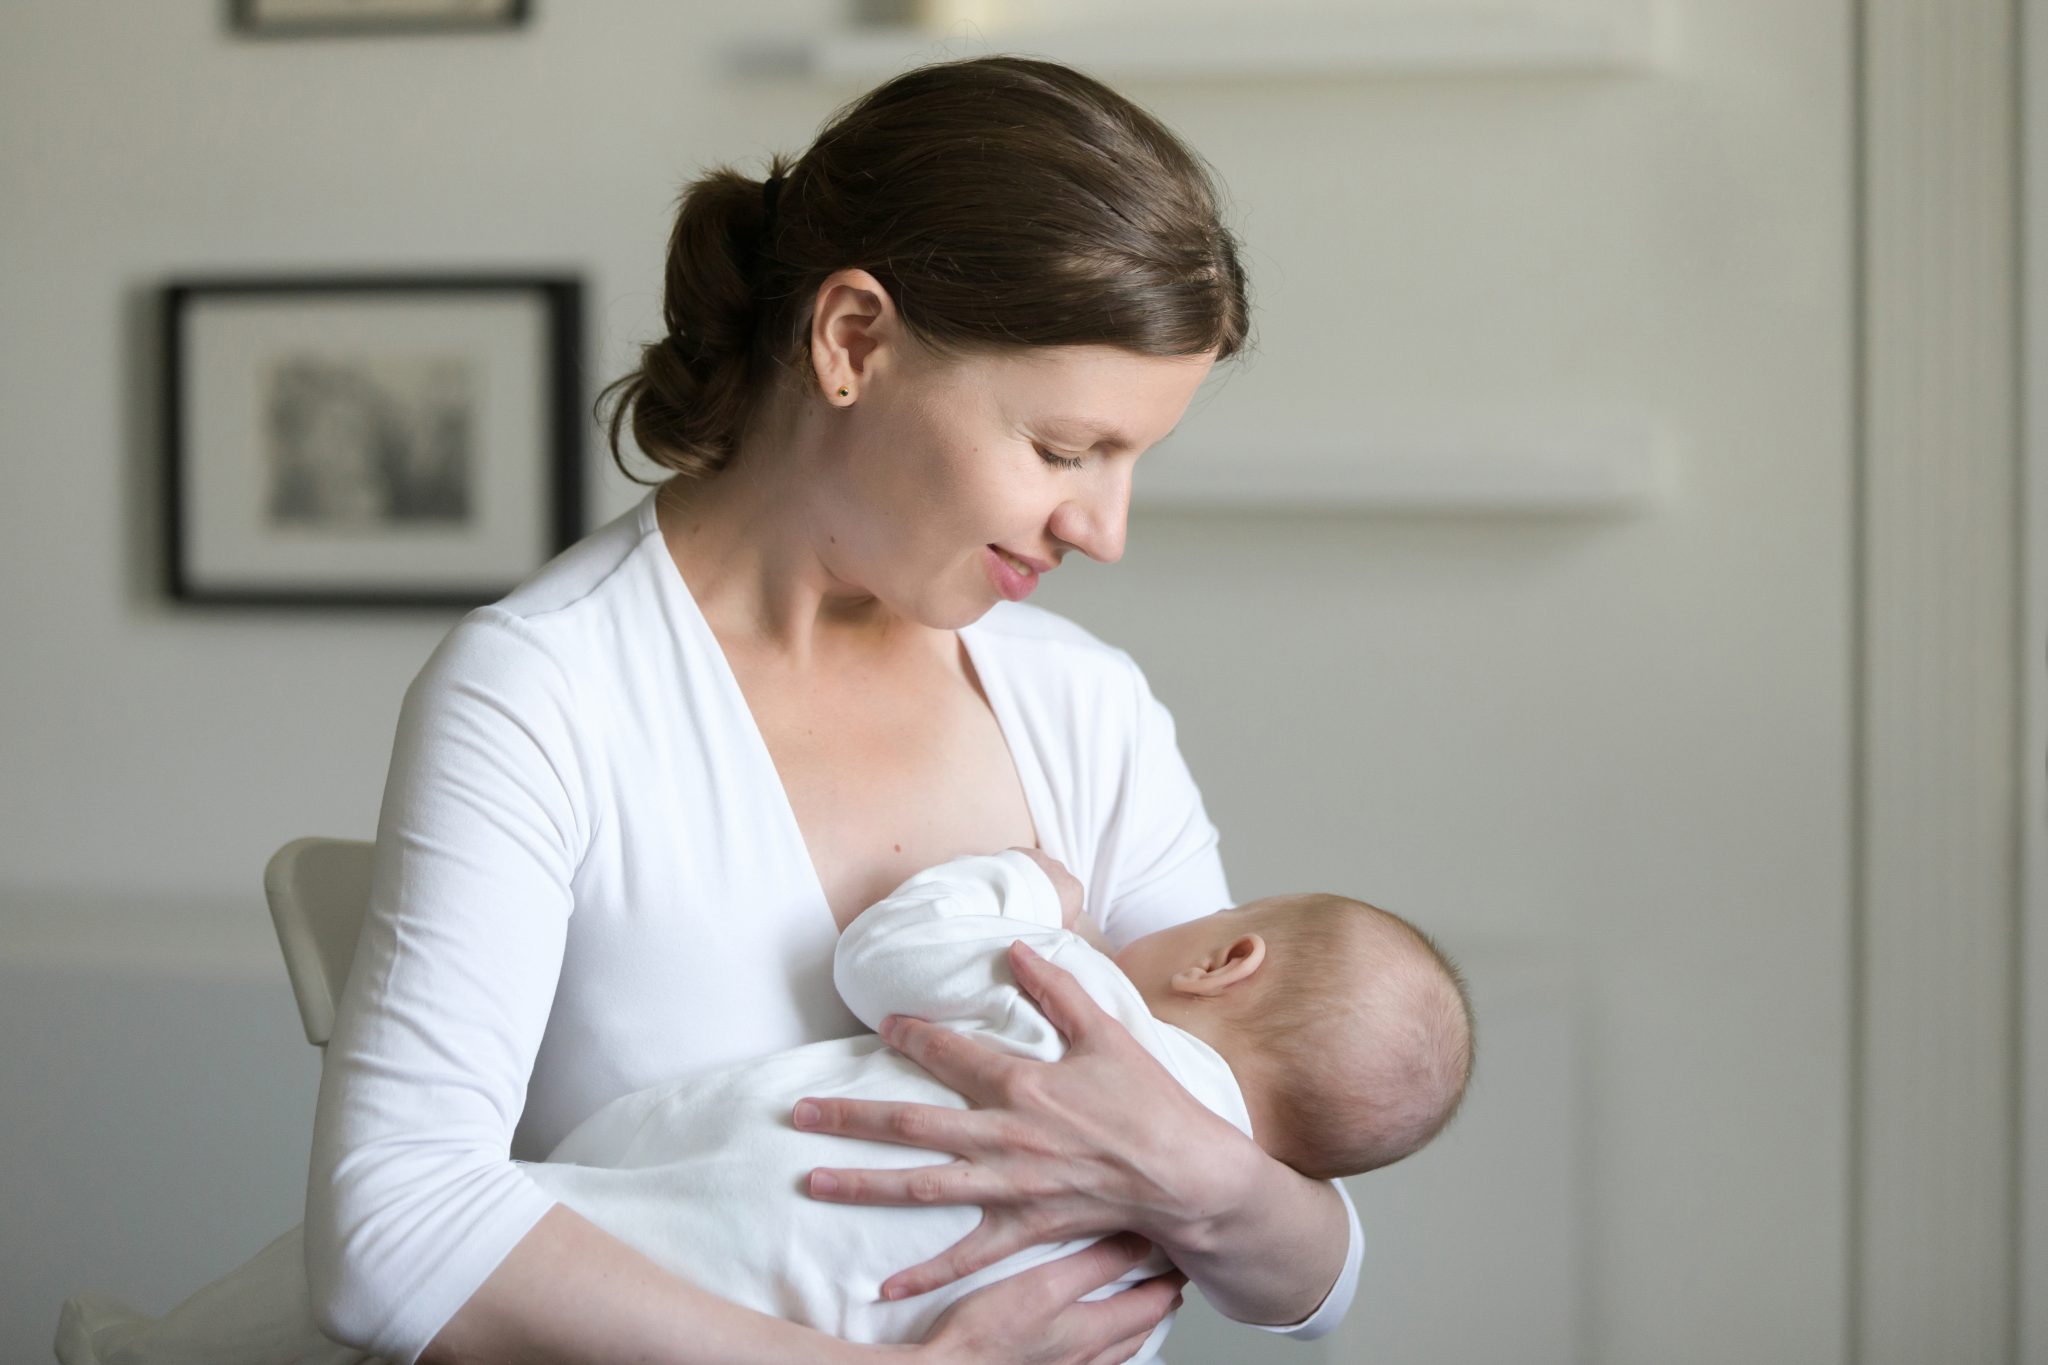 Portrait Of A Young Woman Breastfeeding A Child; national breastfeeding month